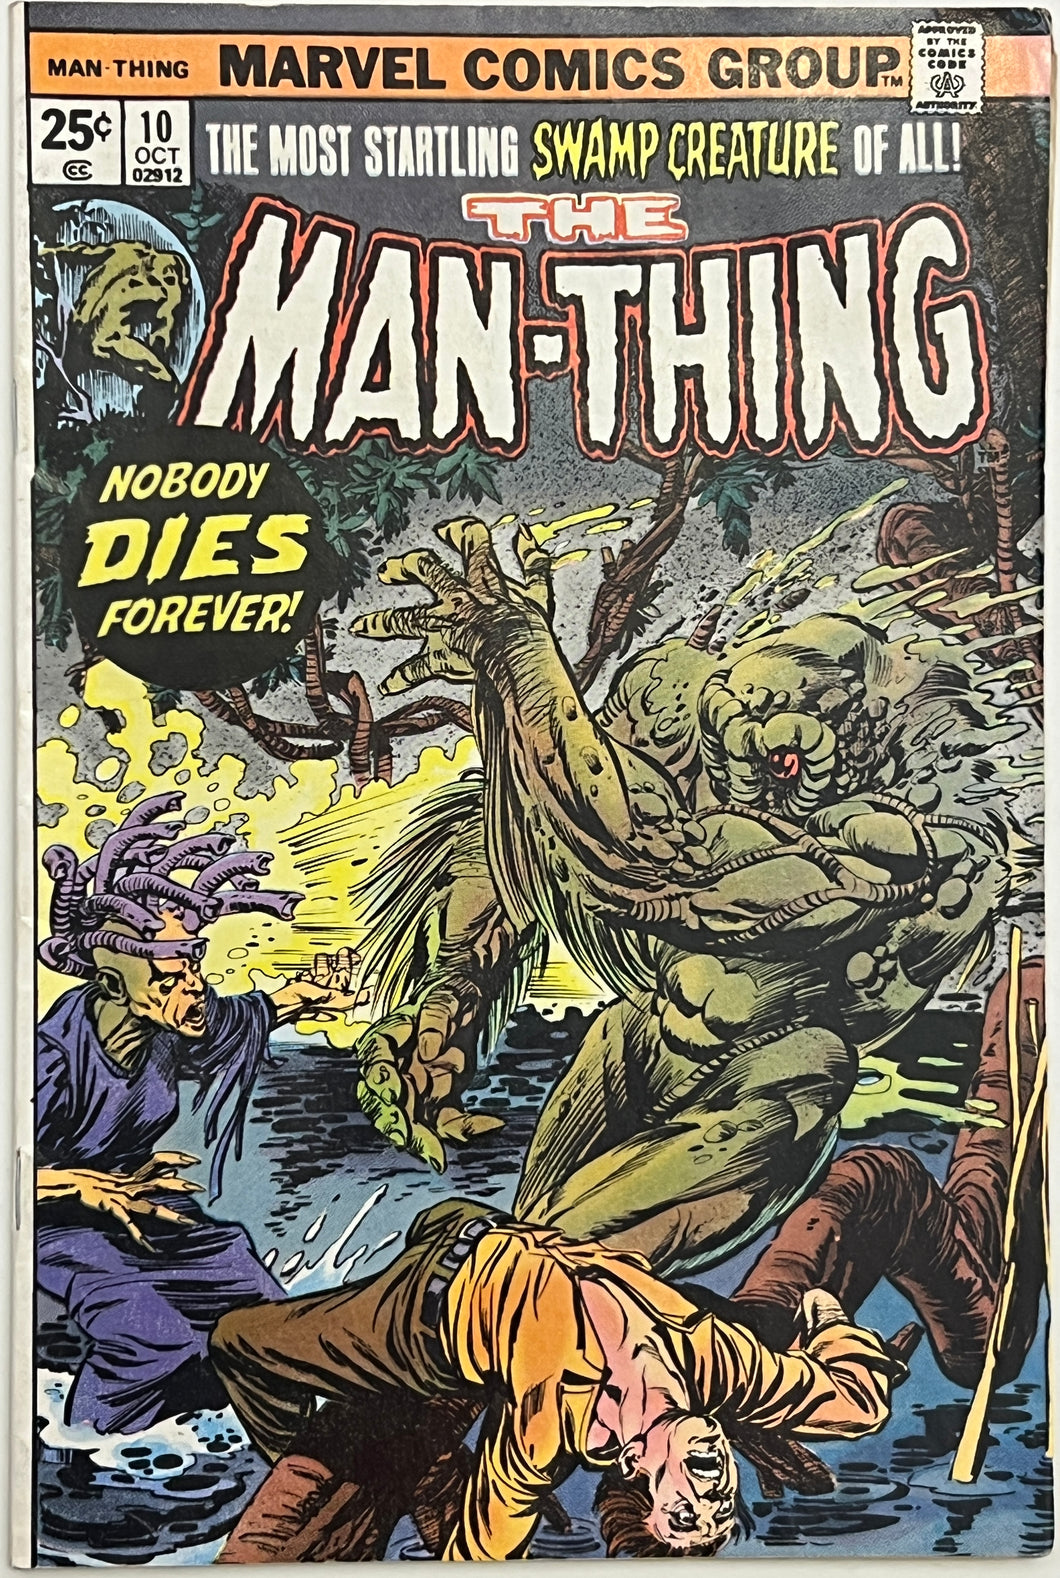 The Man-Thing #10 (1974)